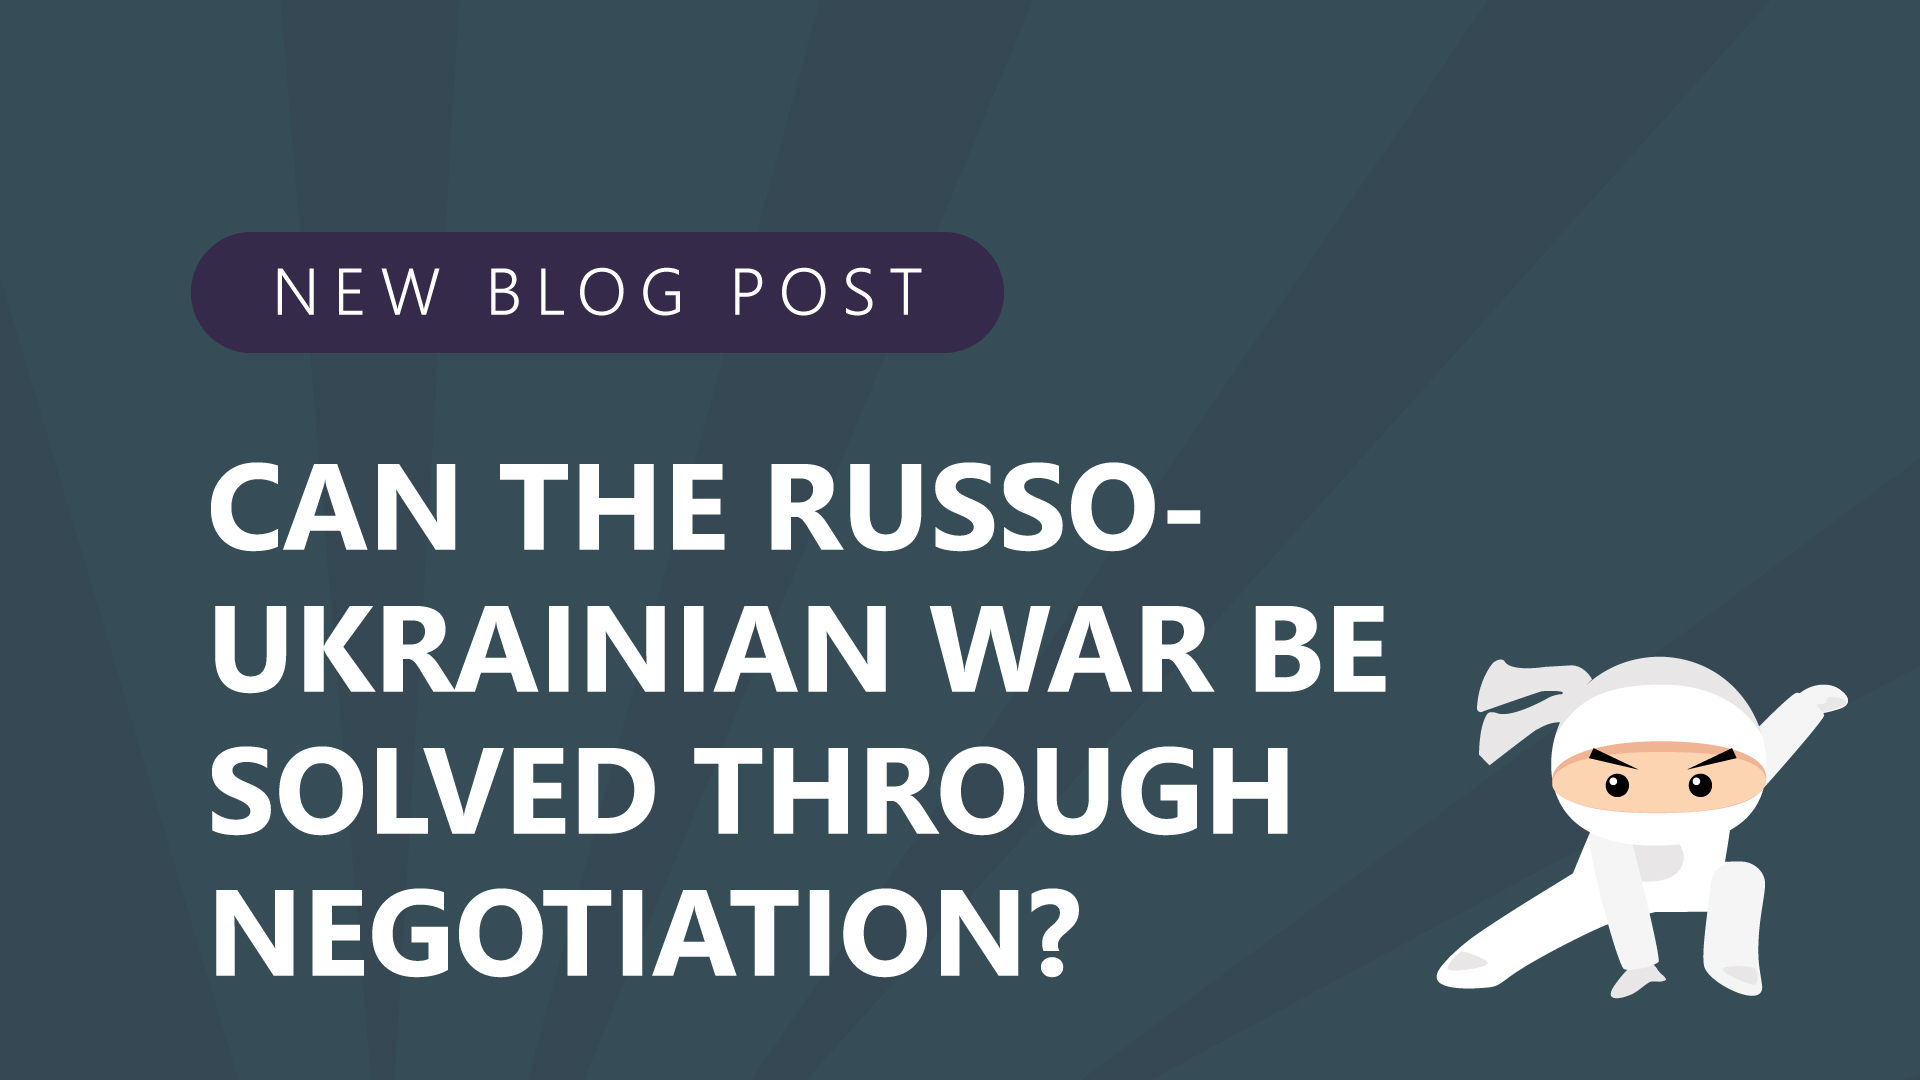 Can-The-Russo-Ukrainian-War-be-Solved-Through-Negotiation.jpg